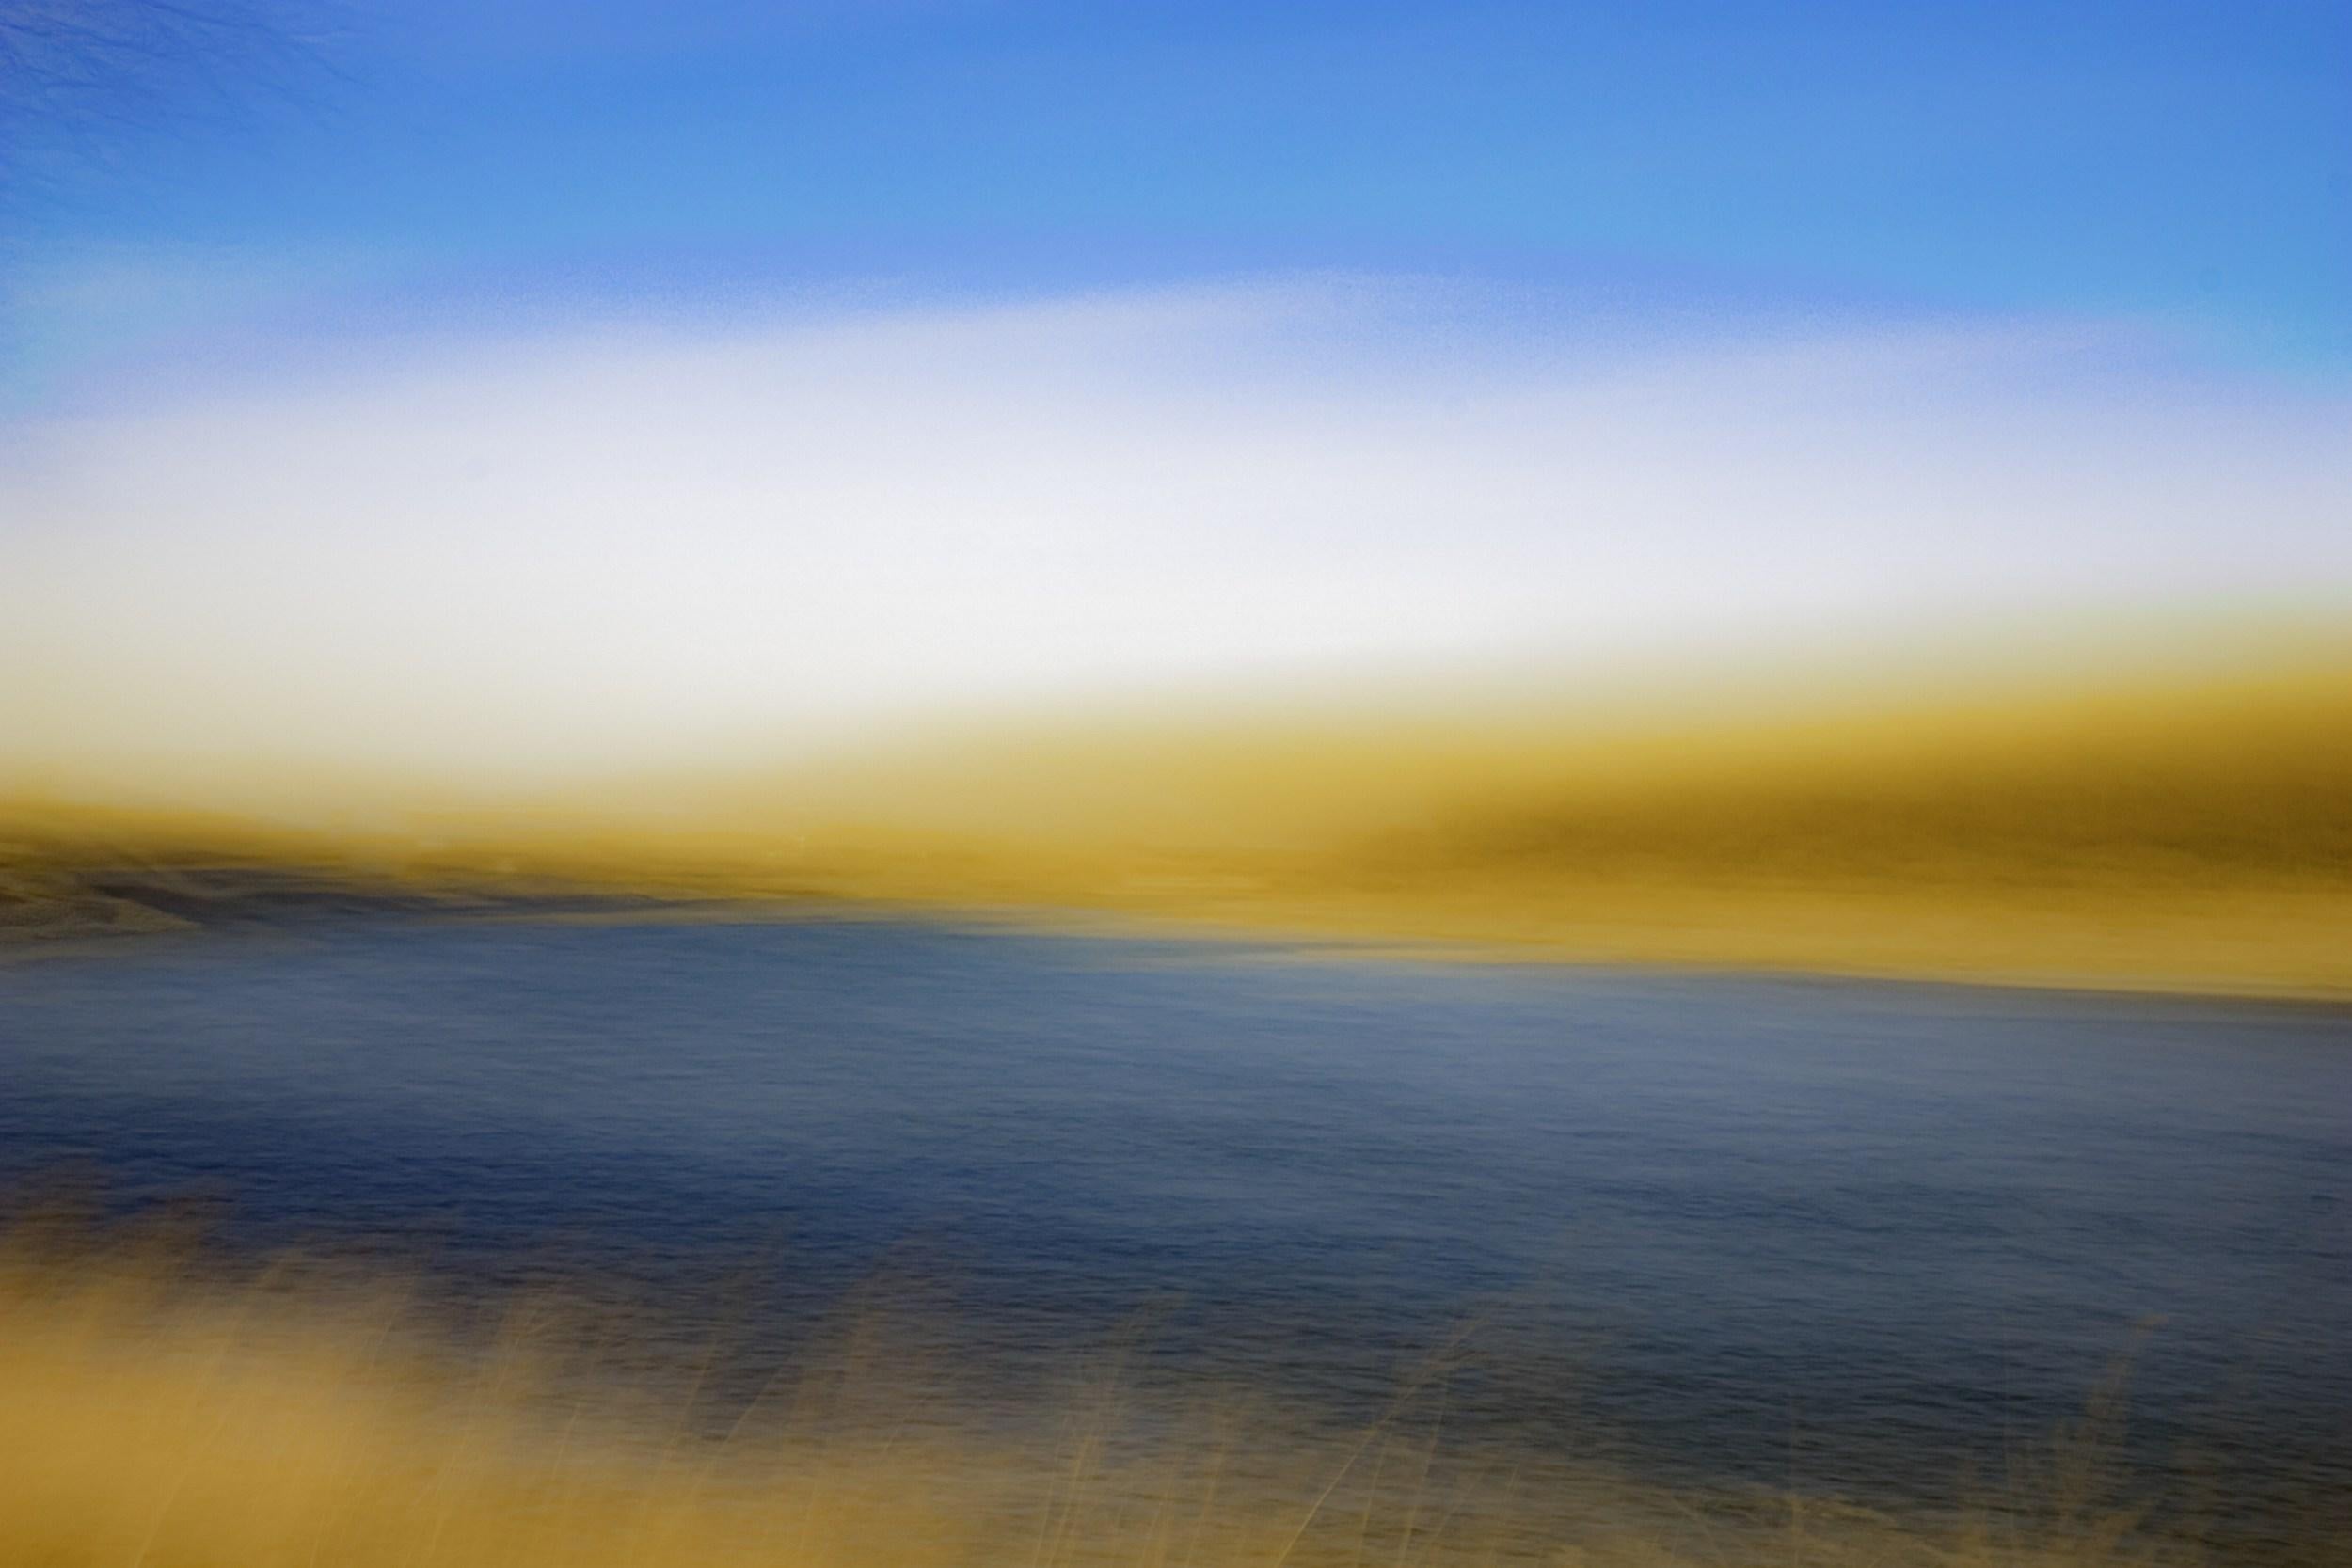 Jeffrey Tamblyn Abstract Photograph - Where Will It Take You? (river, landscape, intentional camera movement, Midwest)